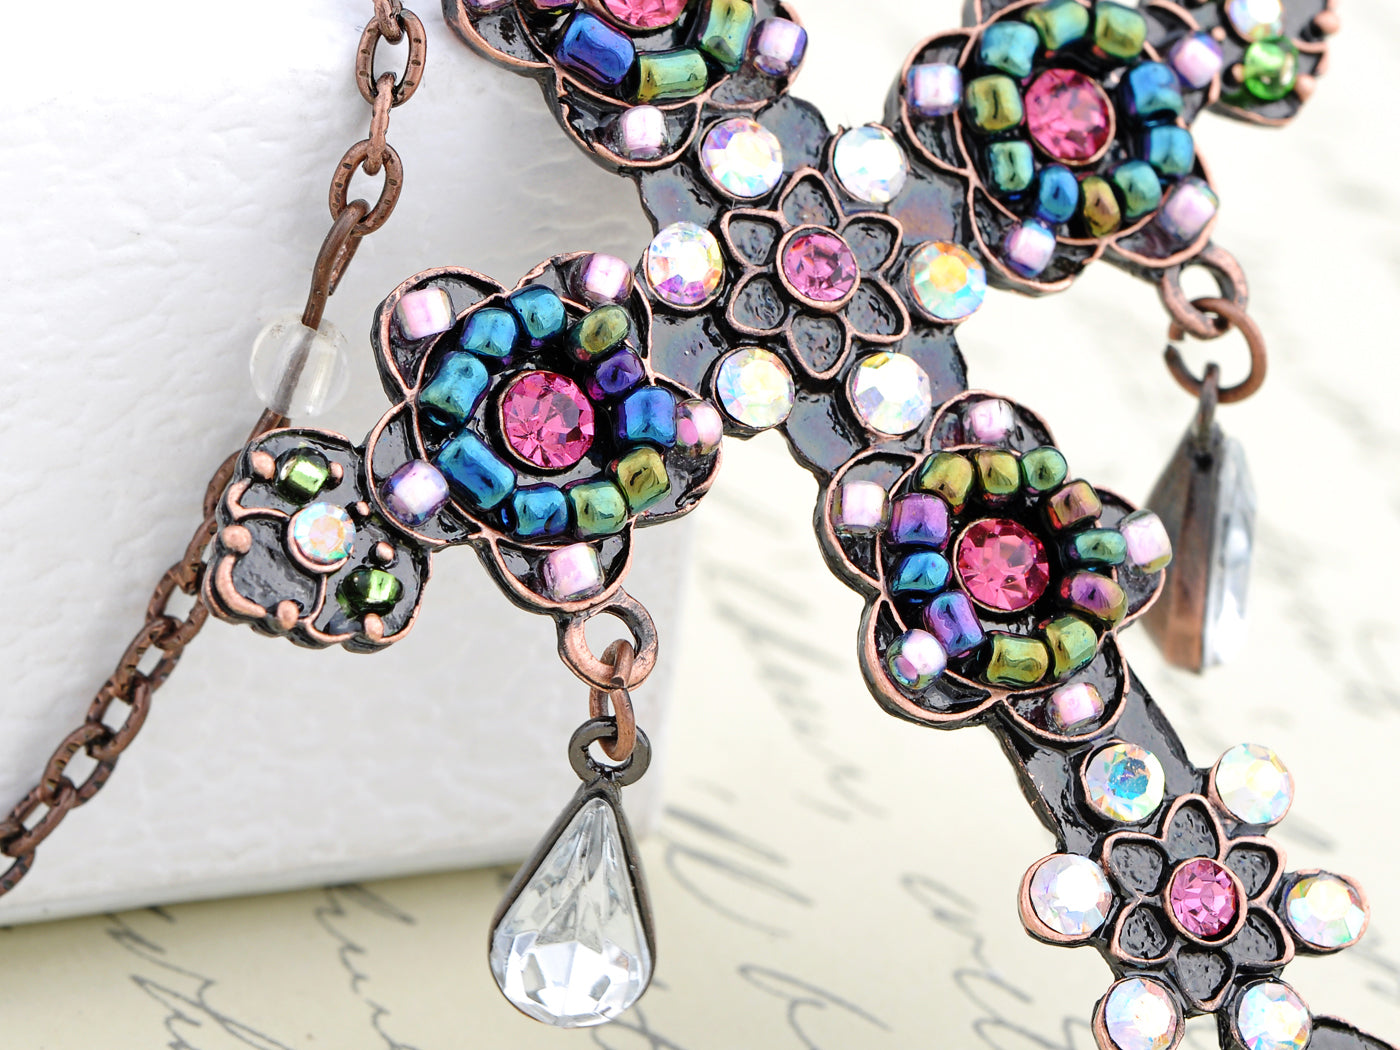 Multi Colored Beaded Holy Cross Tear Drops Necklace Pendant